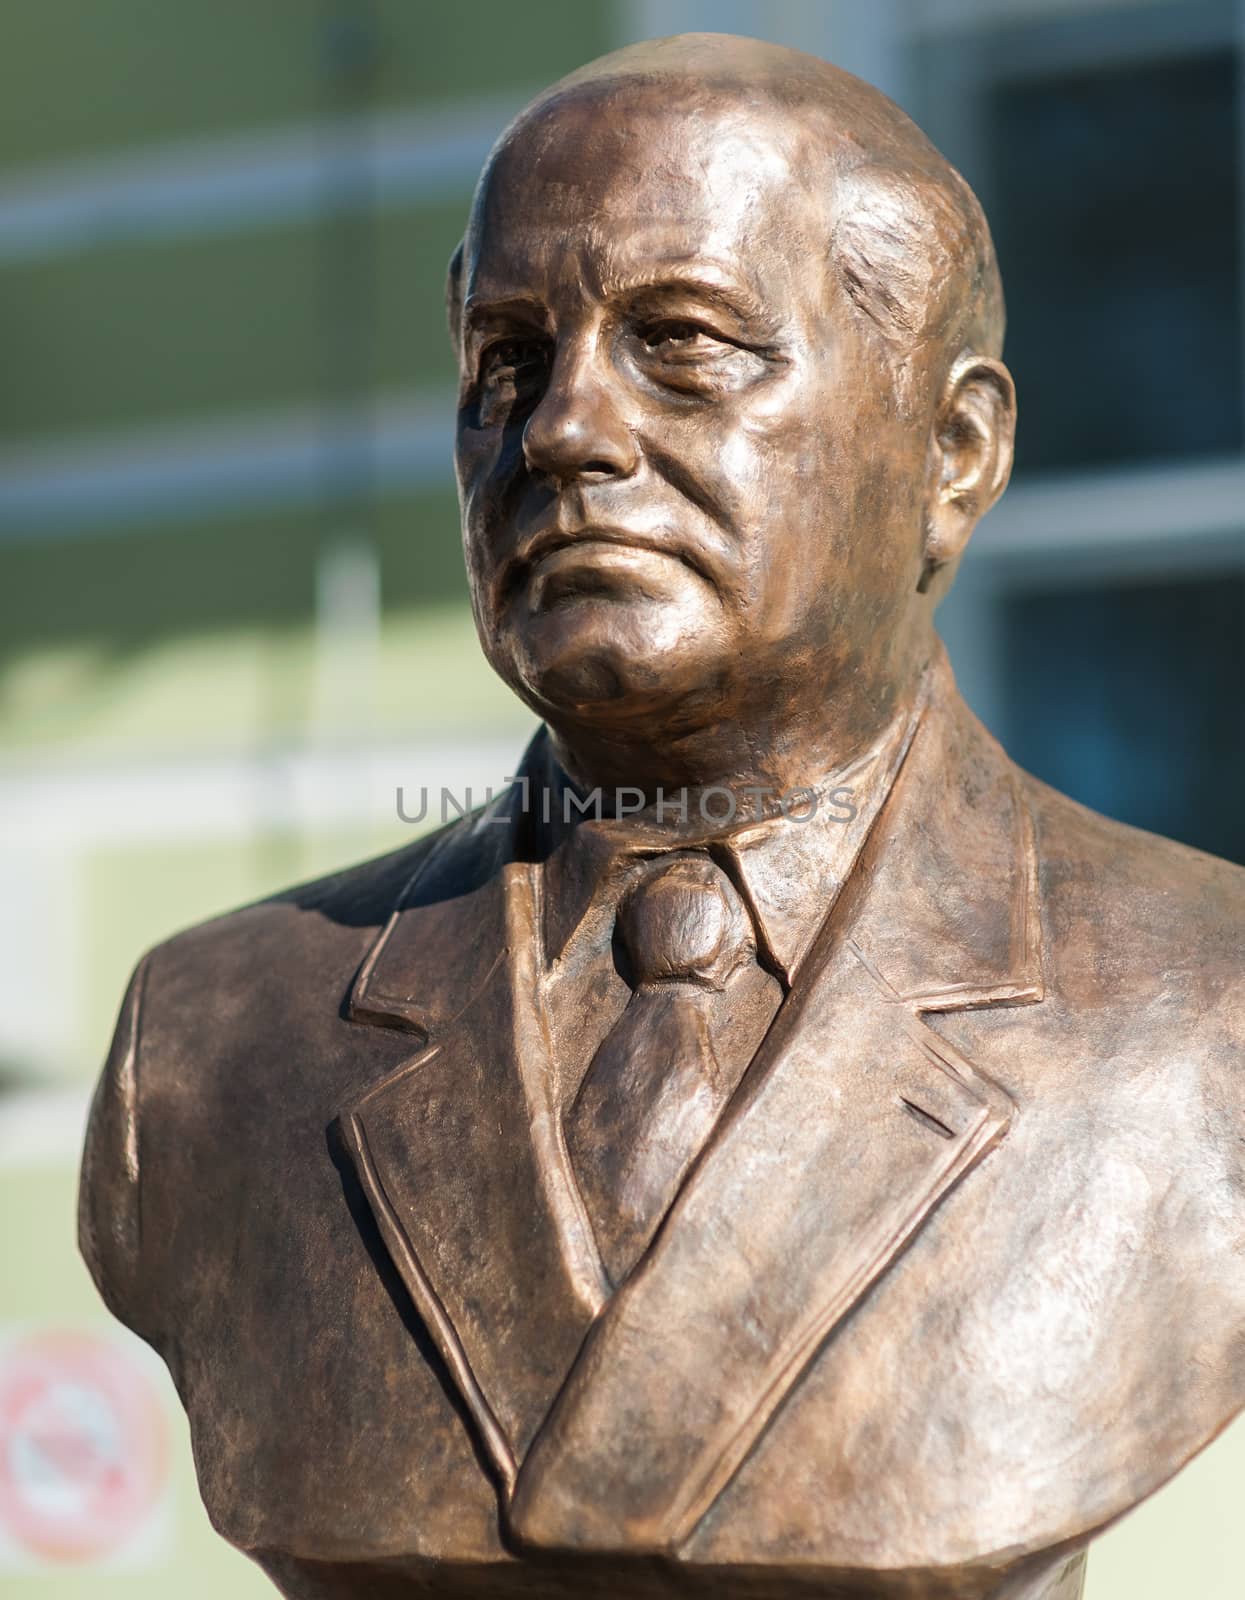 September 23, 2017 Moscow Russia Bust of the USSR President Mikhail Gorbachev made by Zurab Tsereteli on the Rulers Alley in Moscow.